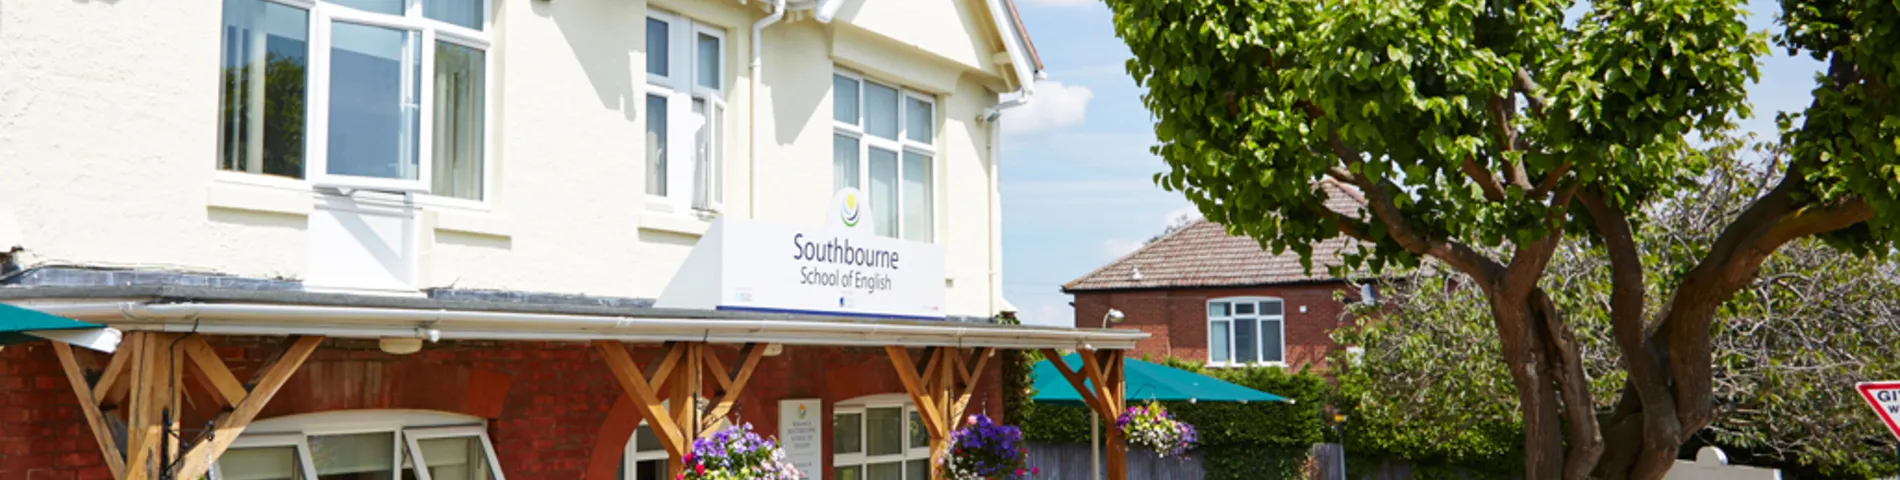 Southbourne School of English 사진 1